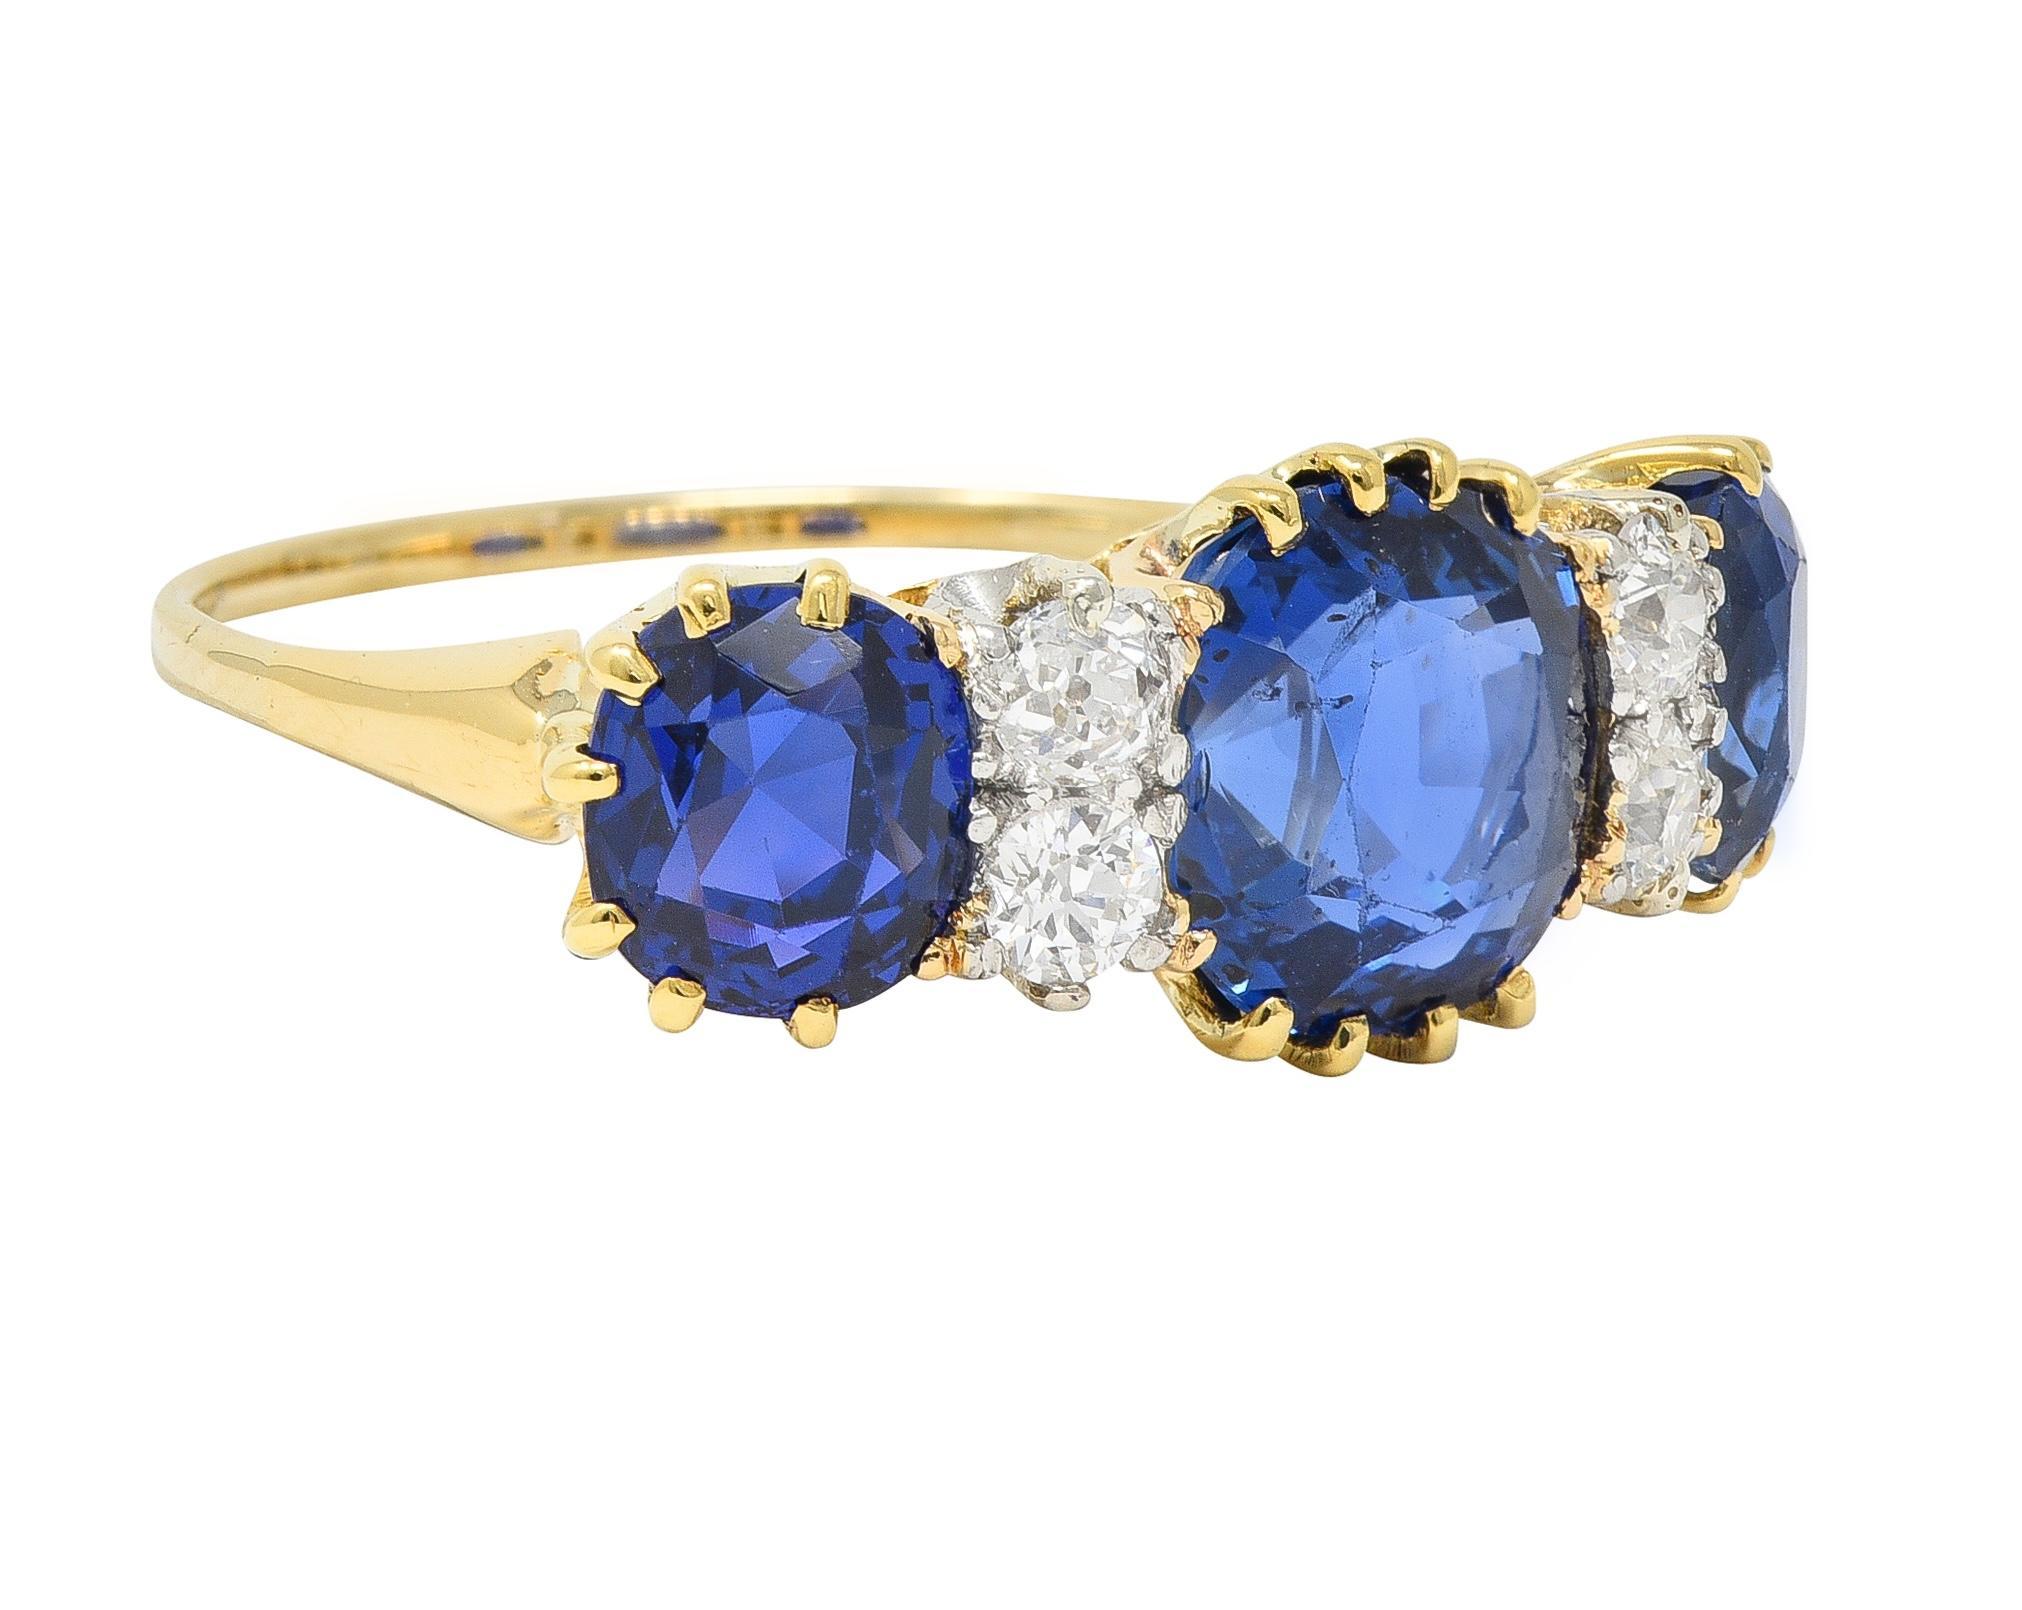 Designed as a band ring with cushion cut sapphires and diamonds prong set in pattern east to west
Center sapphire weighs approximately 2.73 carats - additional sapphires weigh 2.64 carats total
Natural Burmese in origin with no indications of heat